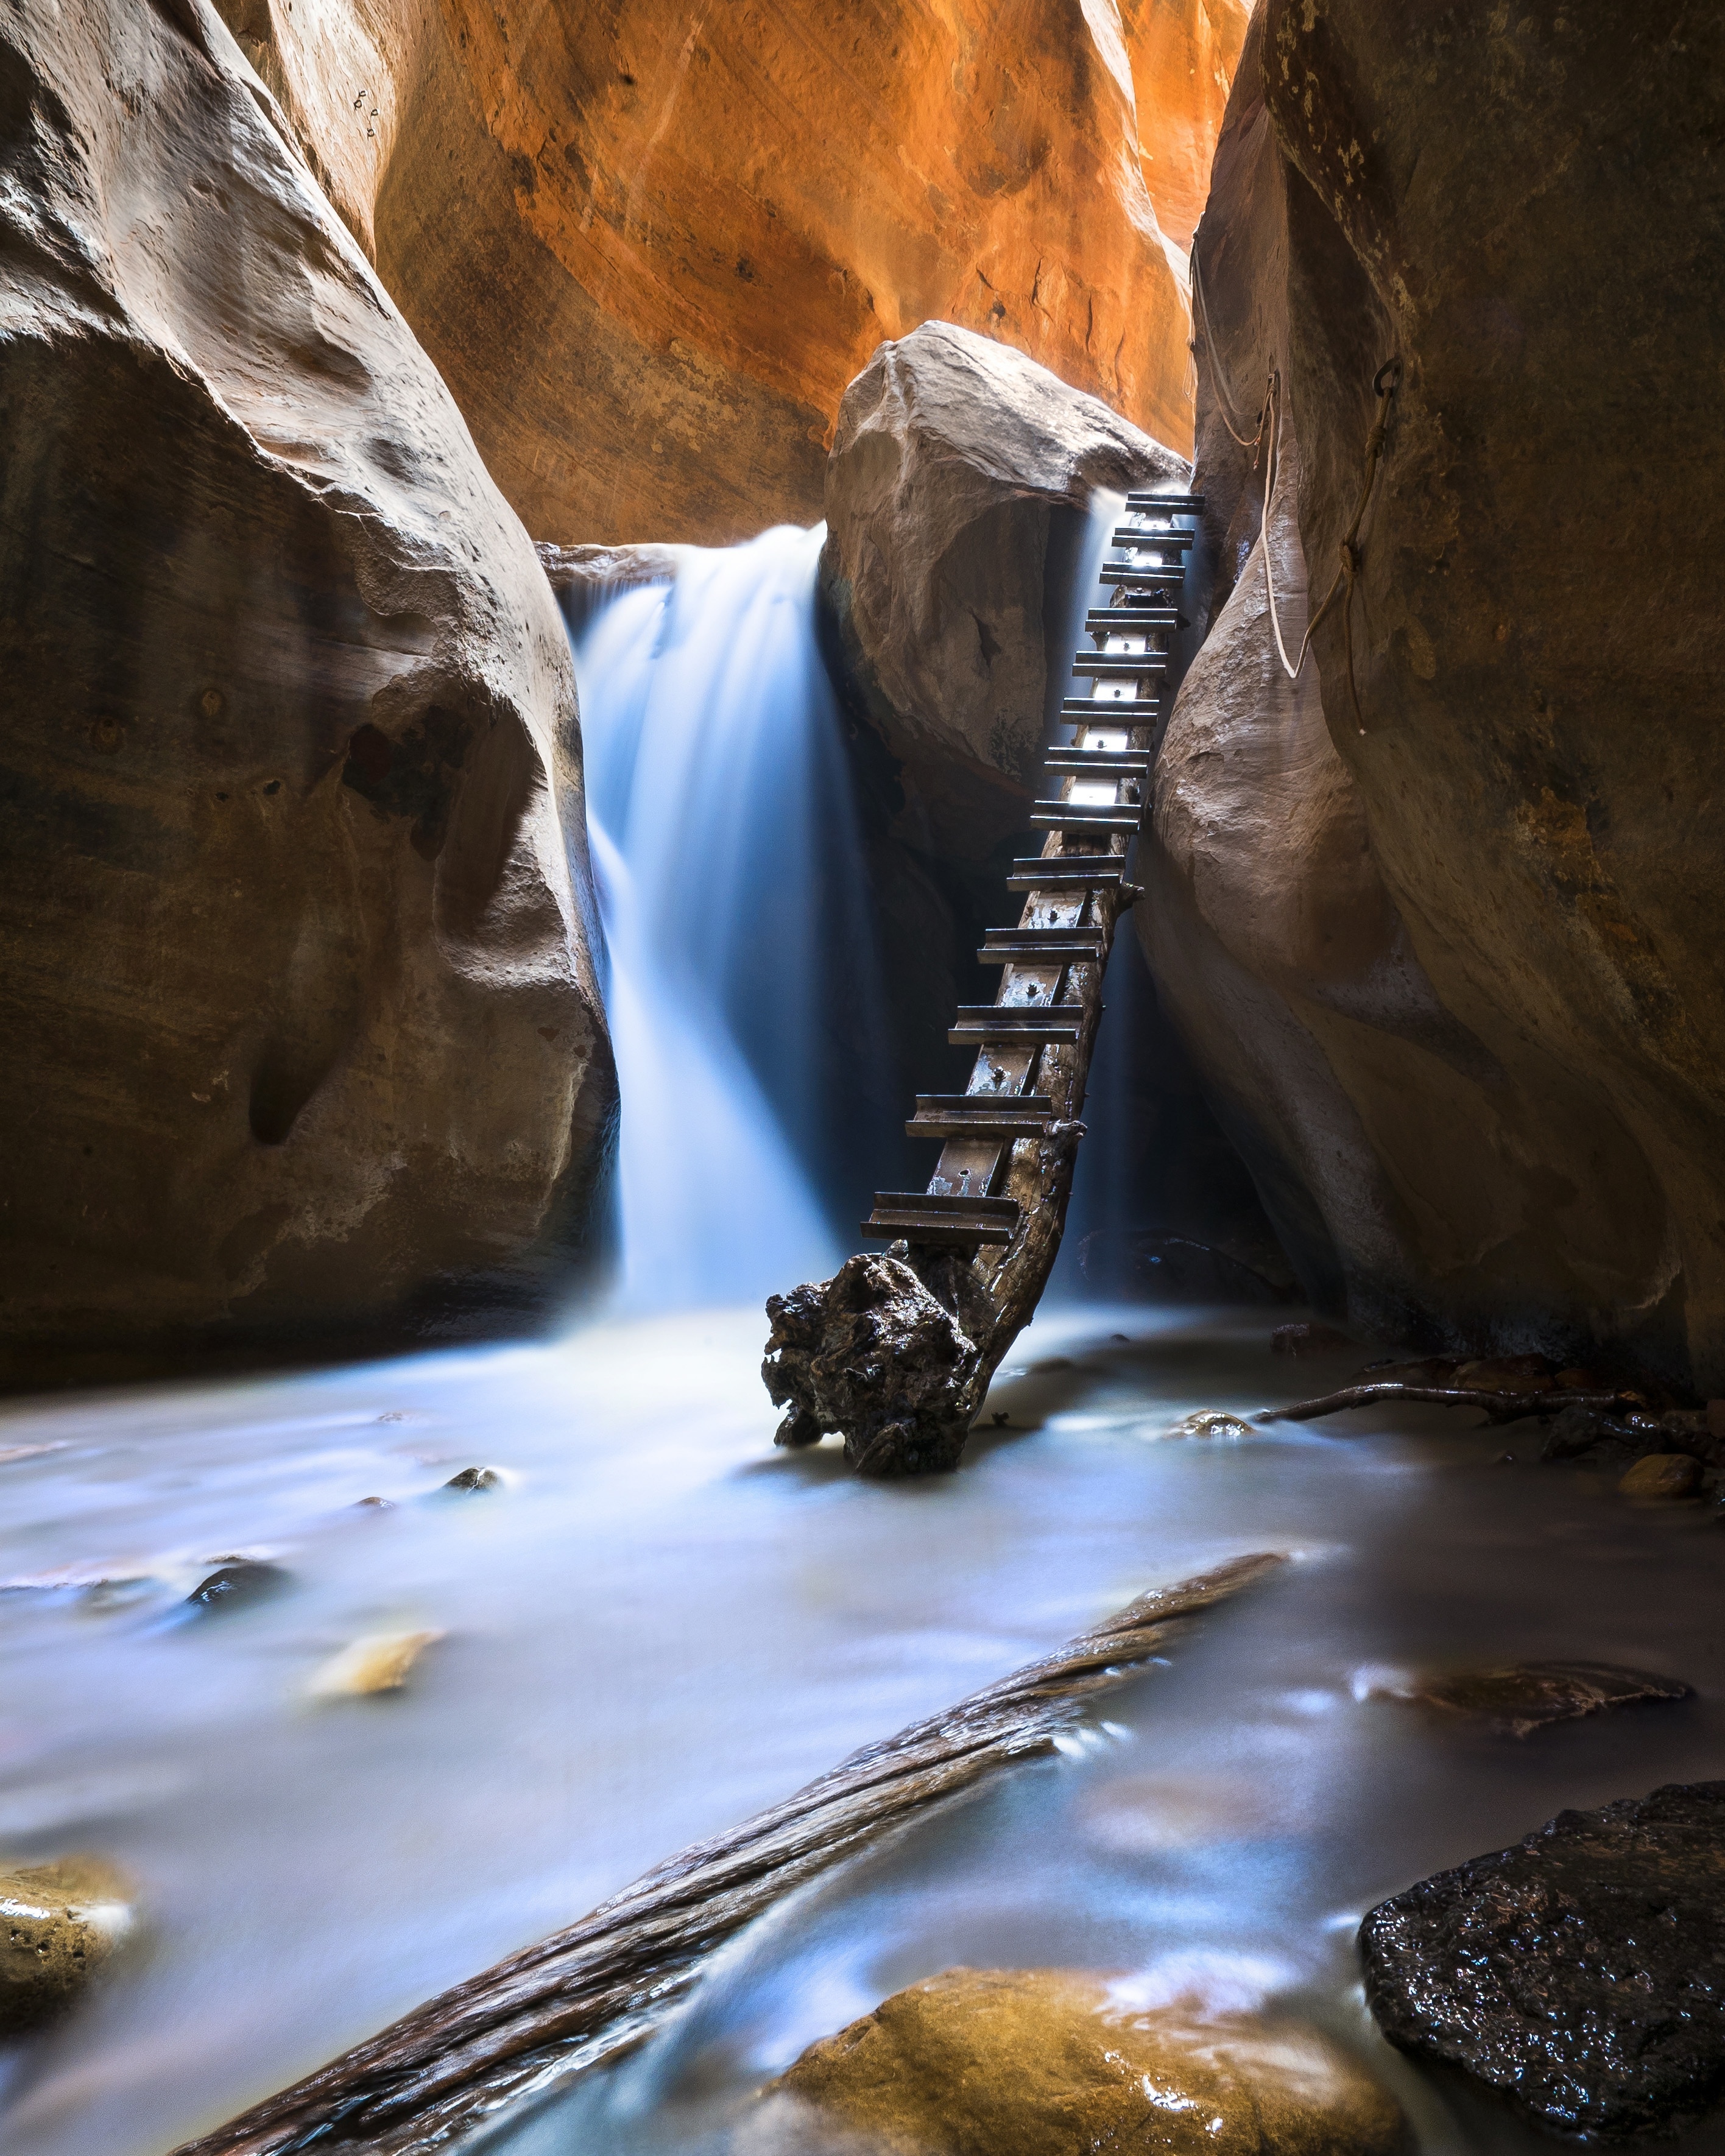 About one hour north of Zion National Park, Kanarraville offers a small slot canyon  accompanied by tree ladders & rope climbs leading to dramatic water cascades. #ADVENTURE